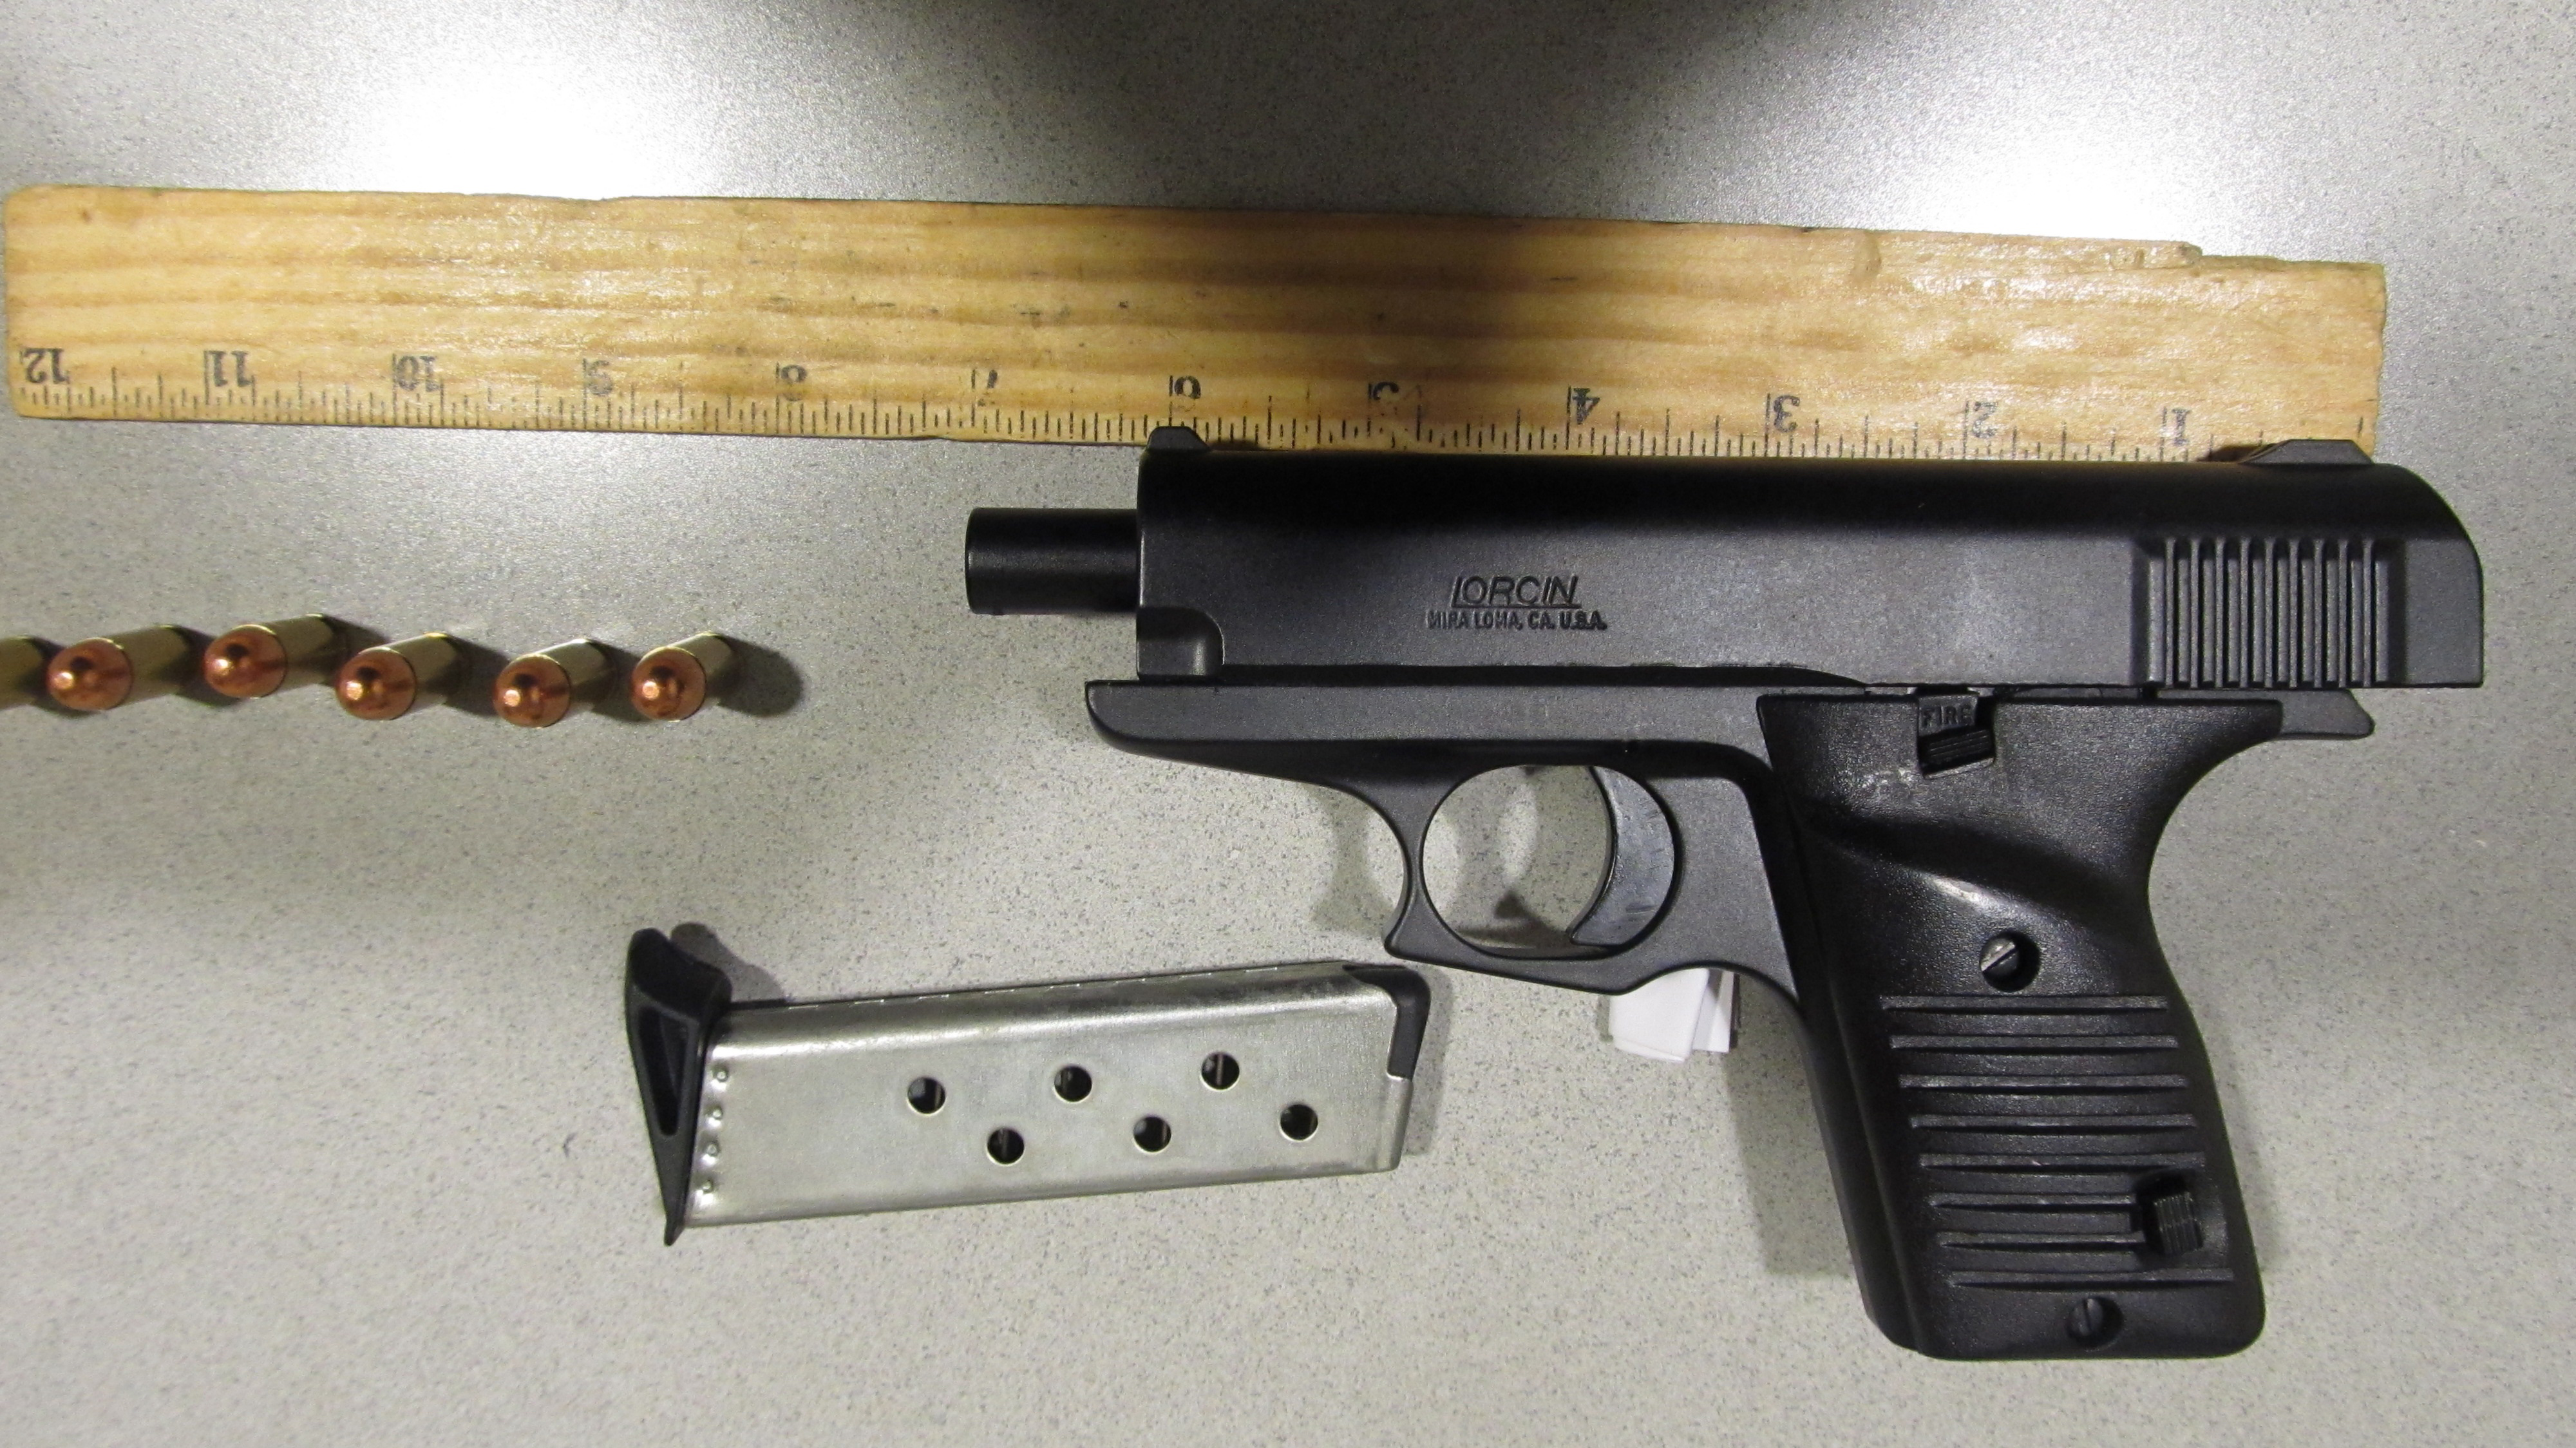 TSA screeners found this Lorcin .380 handgun in the carry-on bag of a 62-year-old man going through security at Midway International Airport. (Credit: TSA)